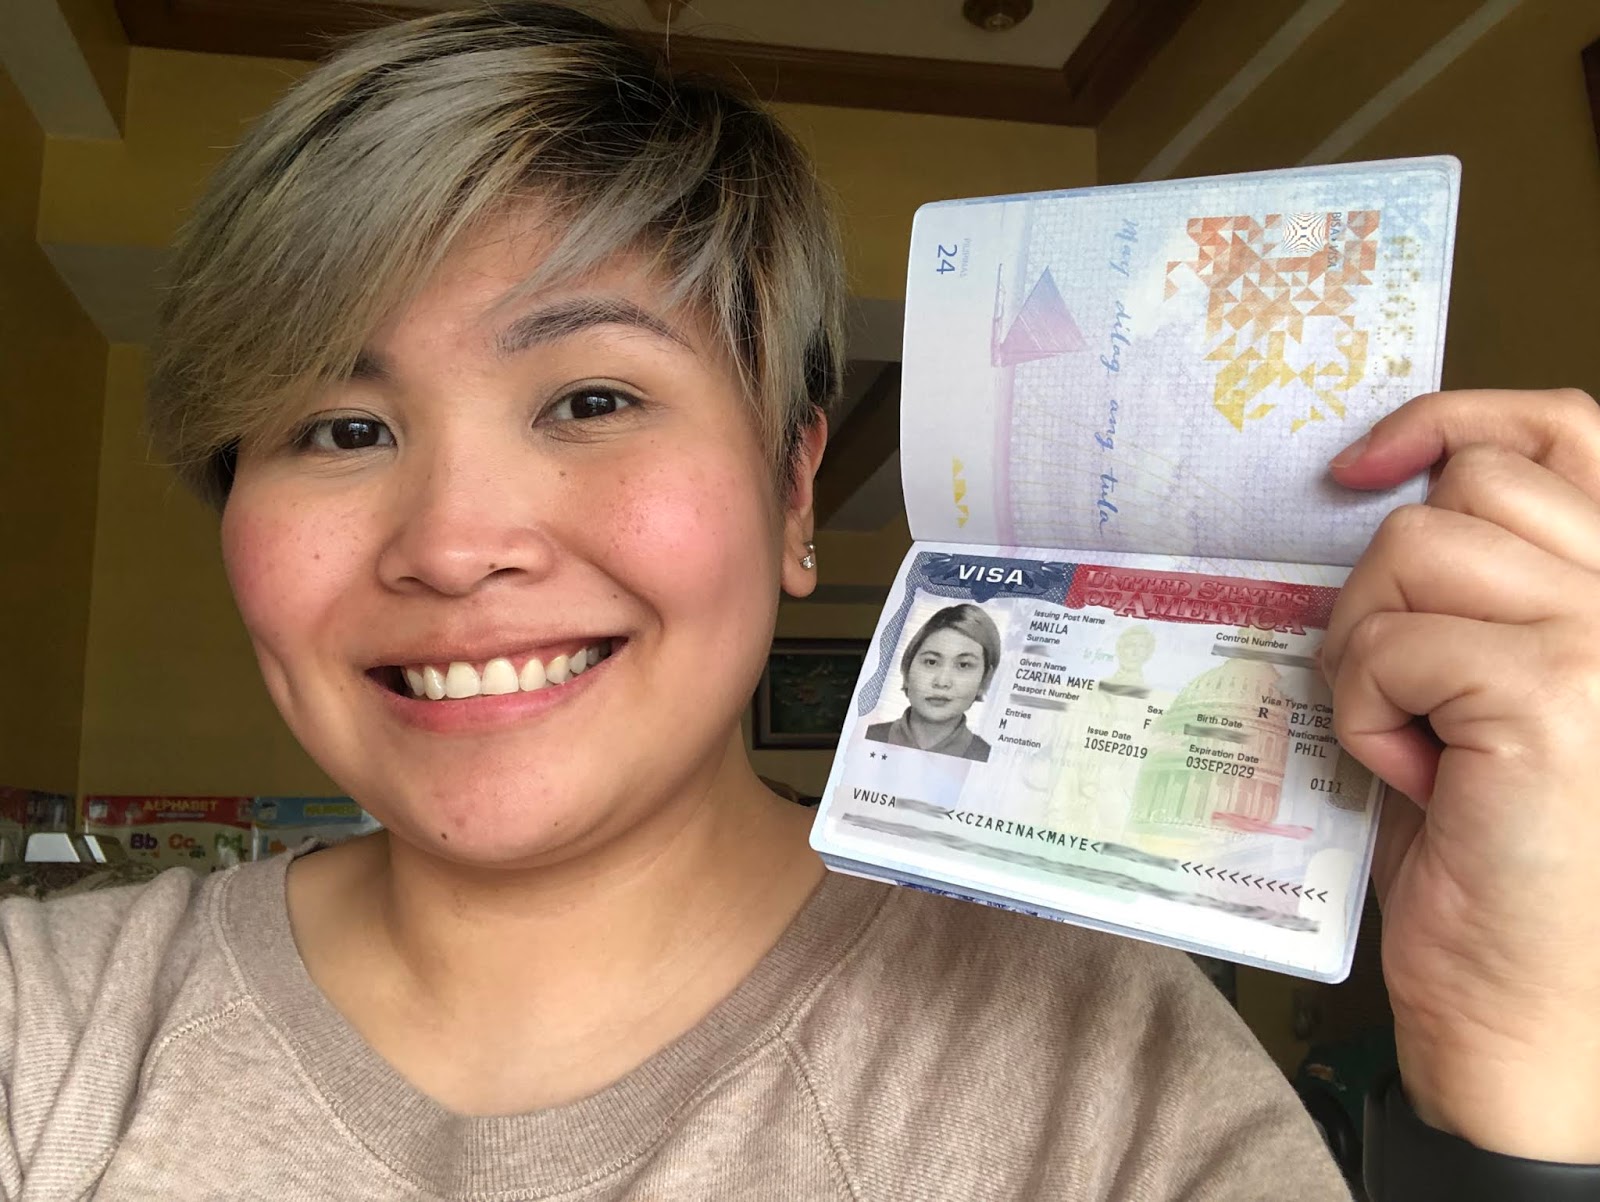 visa to visit philippines from usa